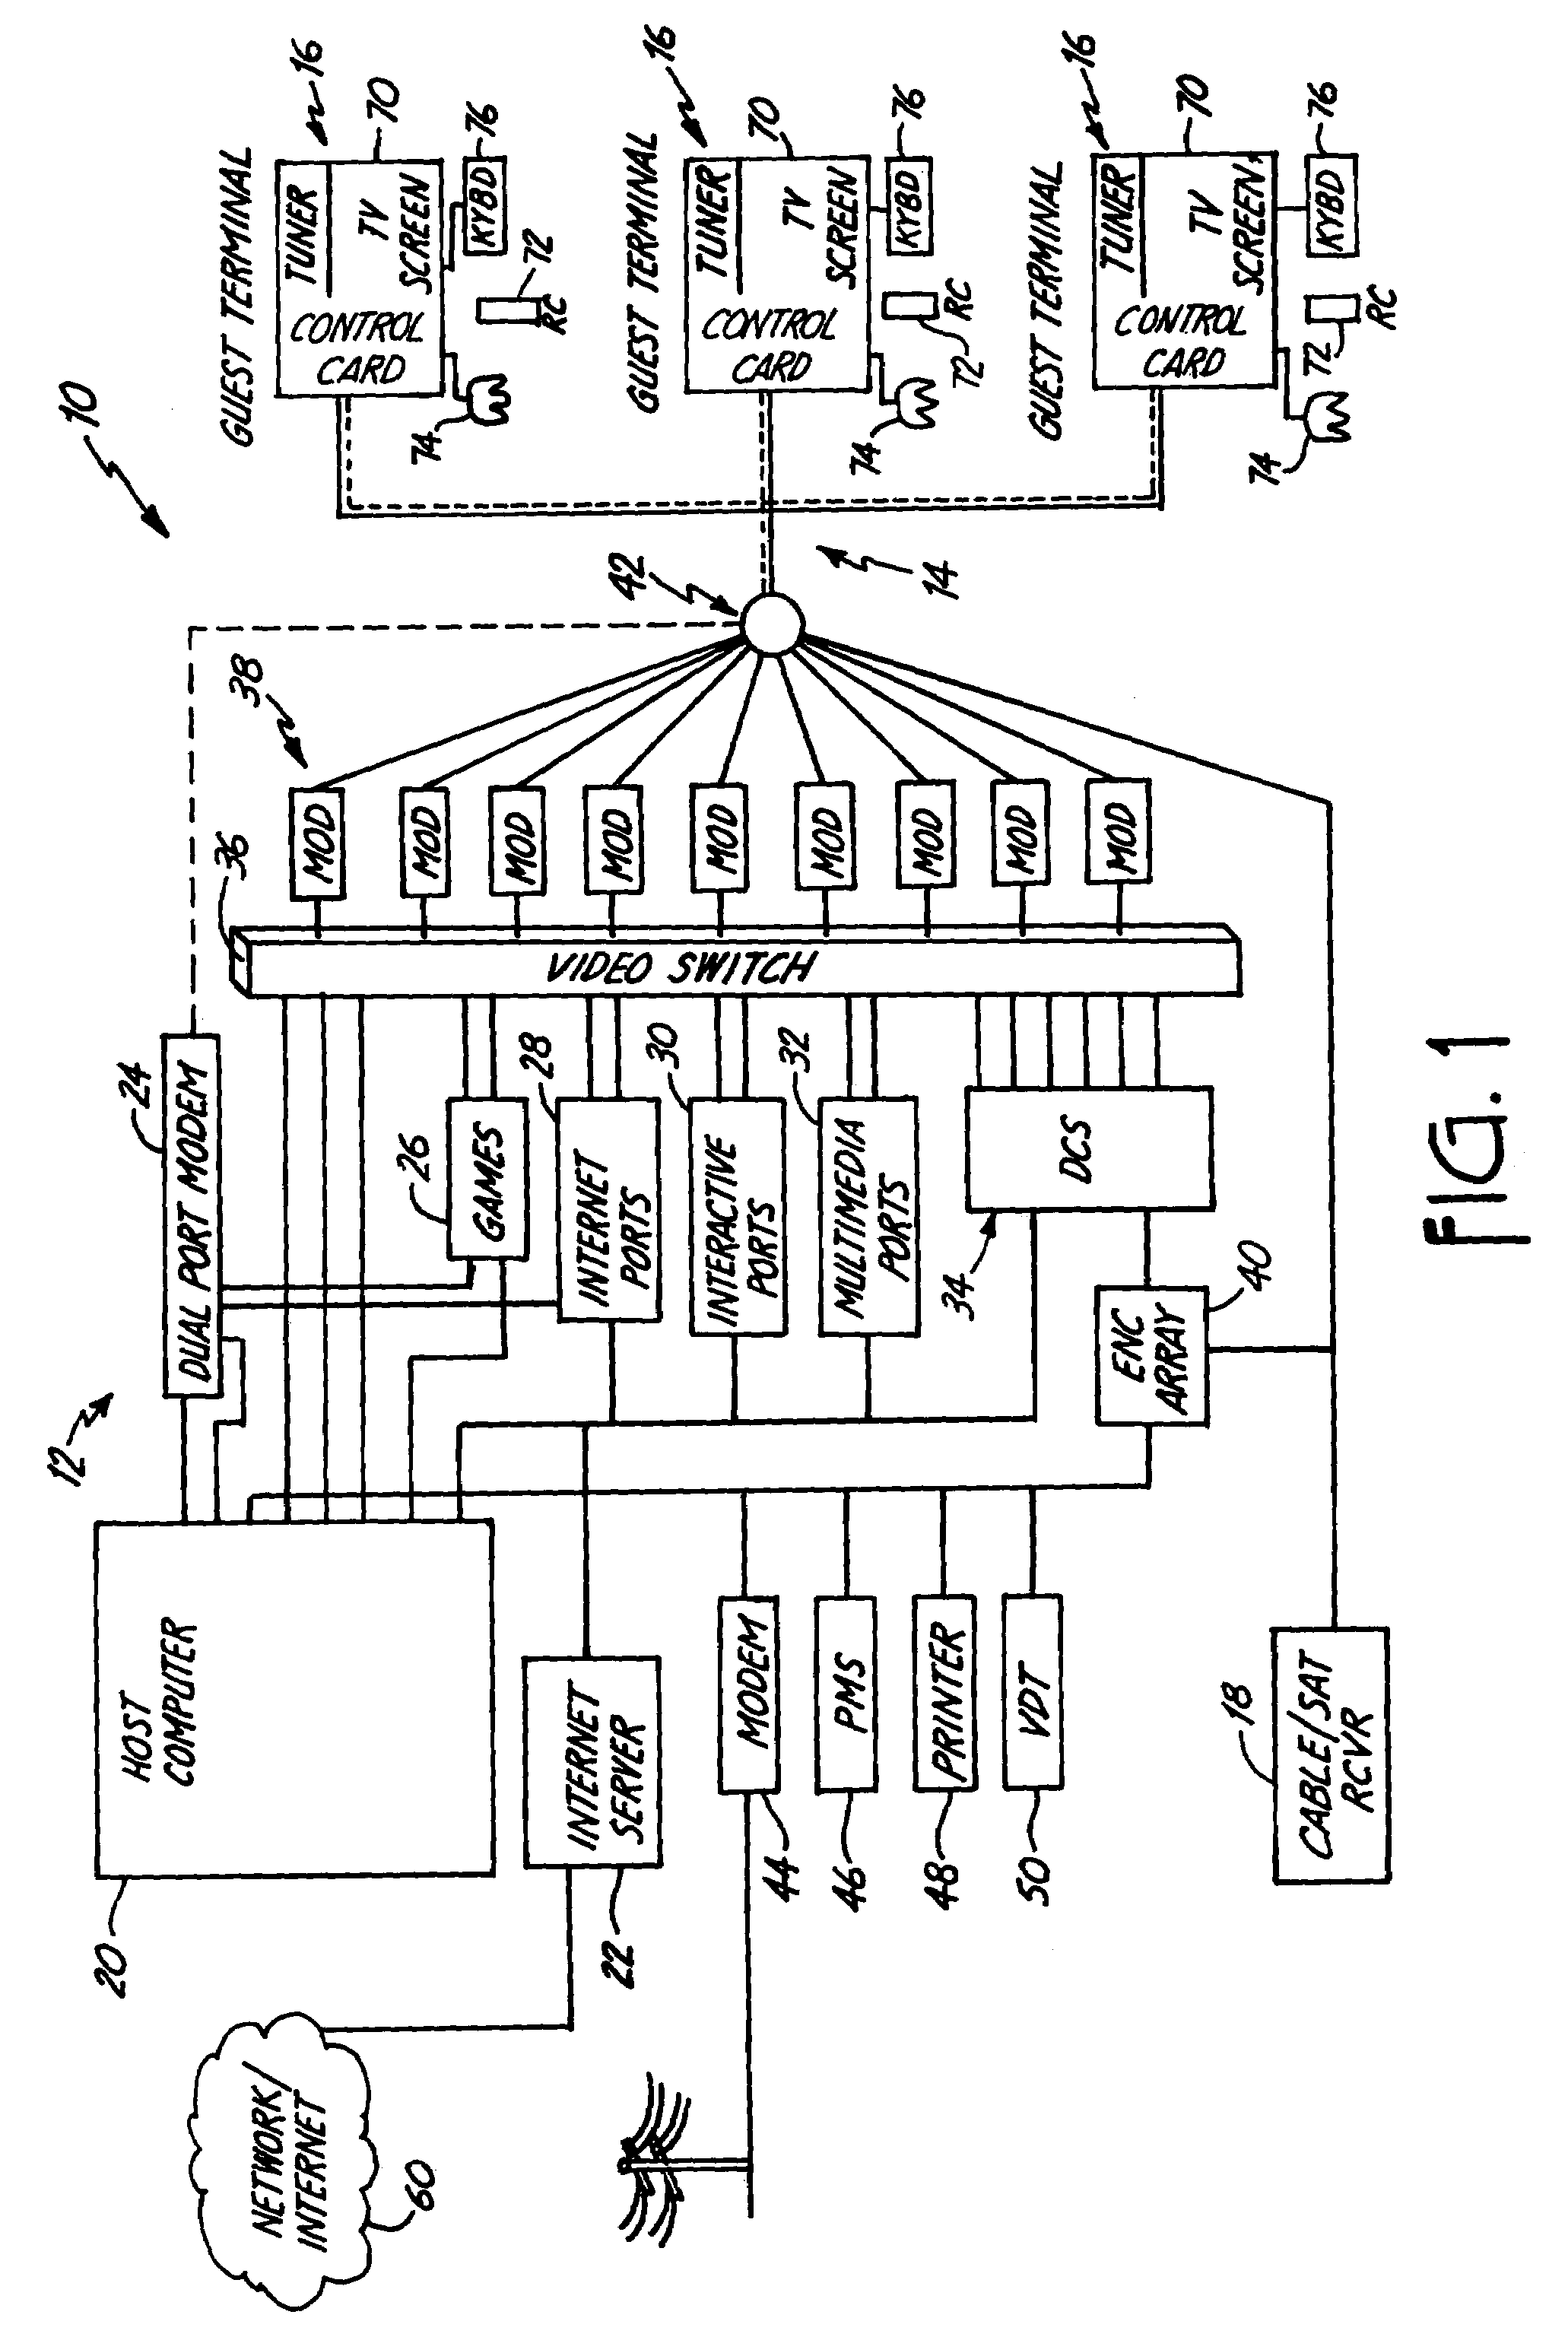 Lodging entertainment system with guest-selected time shifting